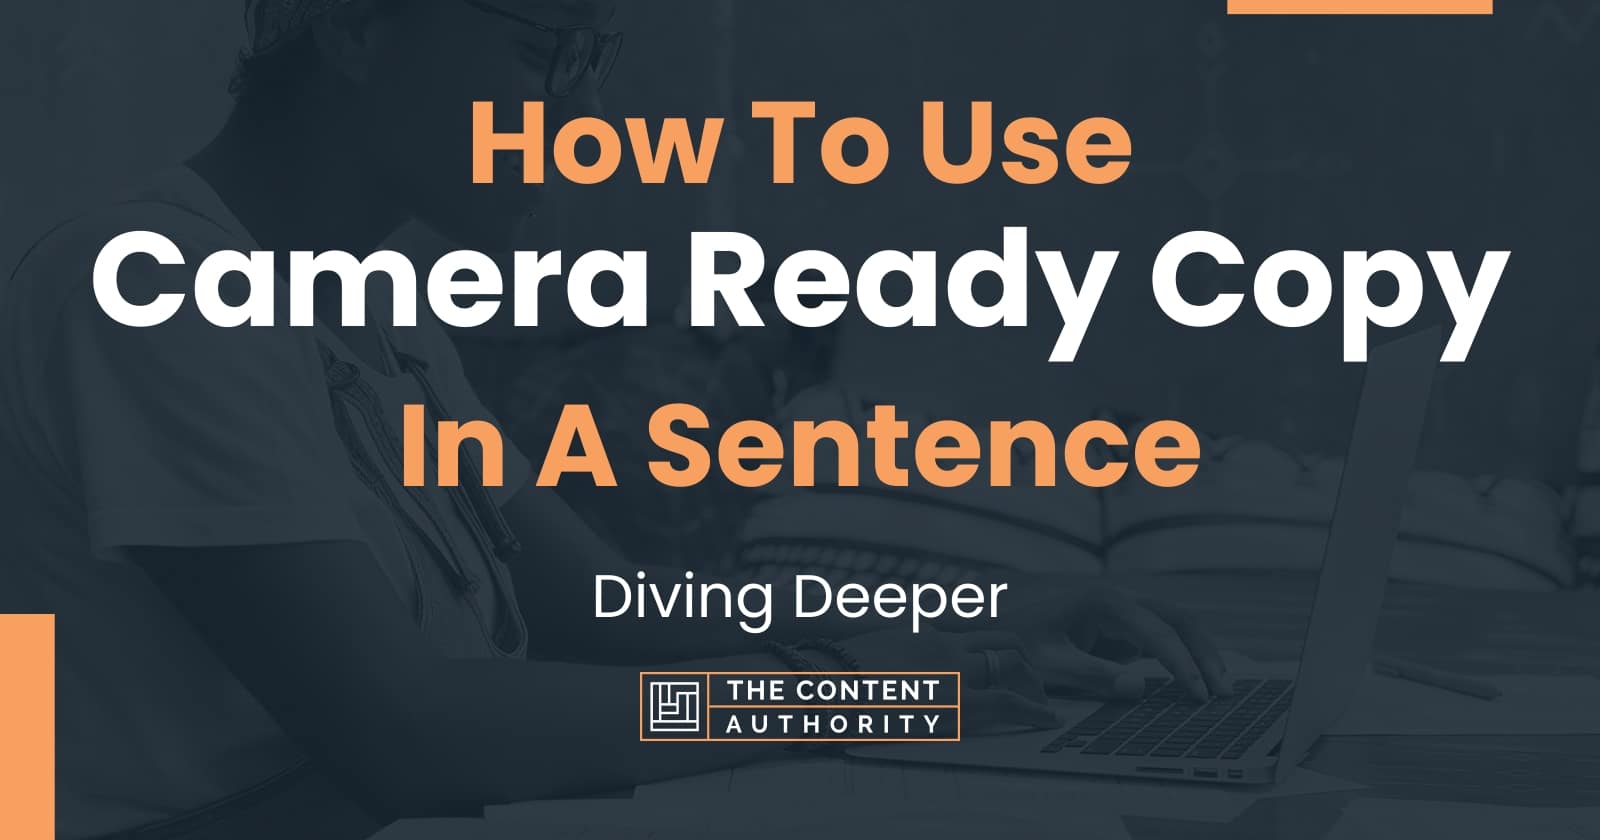 how-to-use-camera-ready-copy-in-a-sentence-diving-deeper